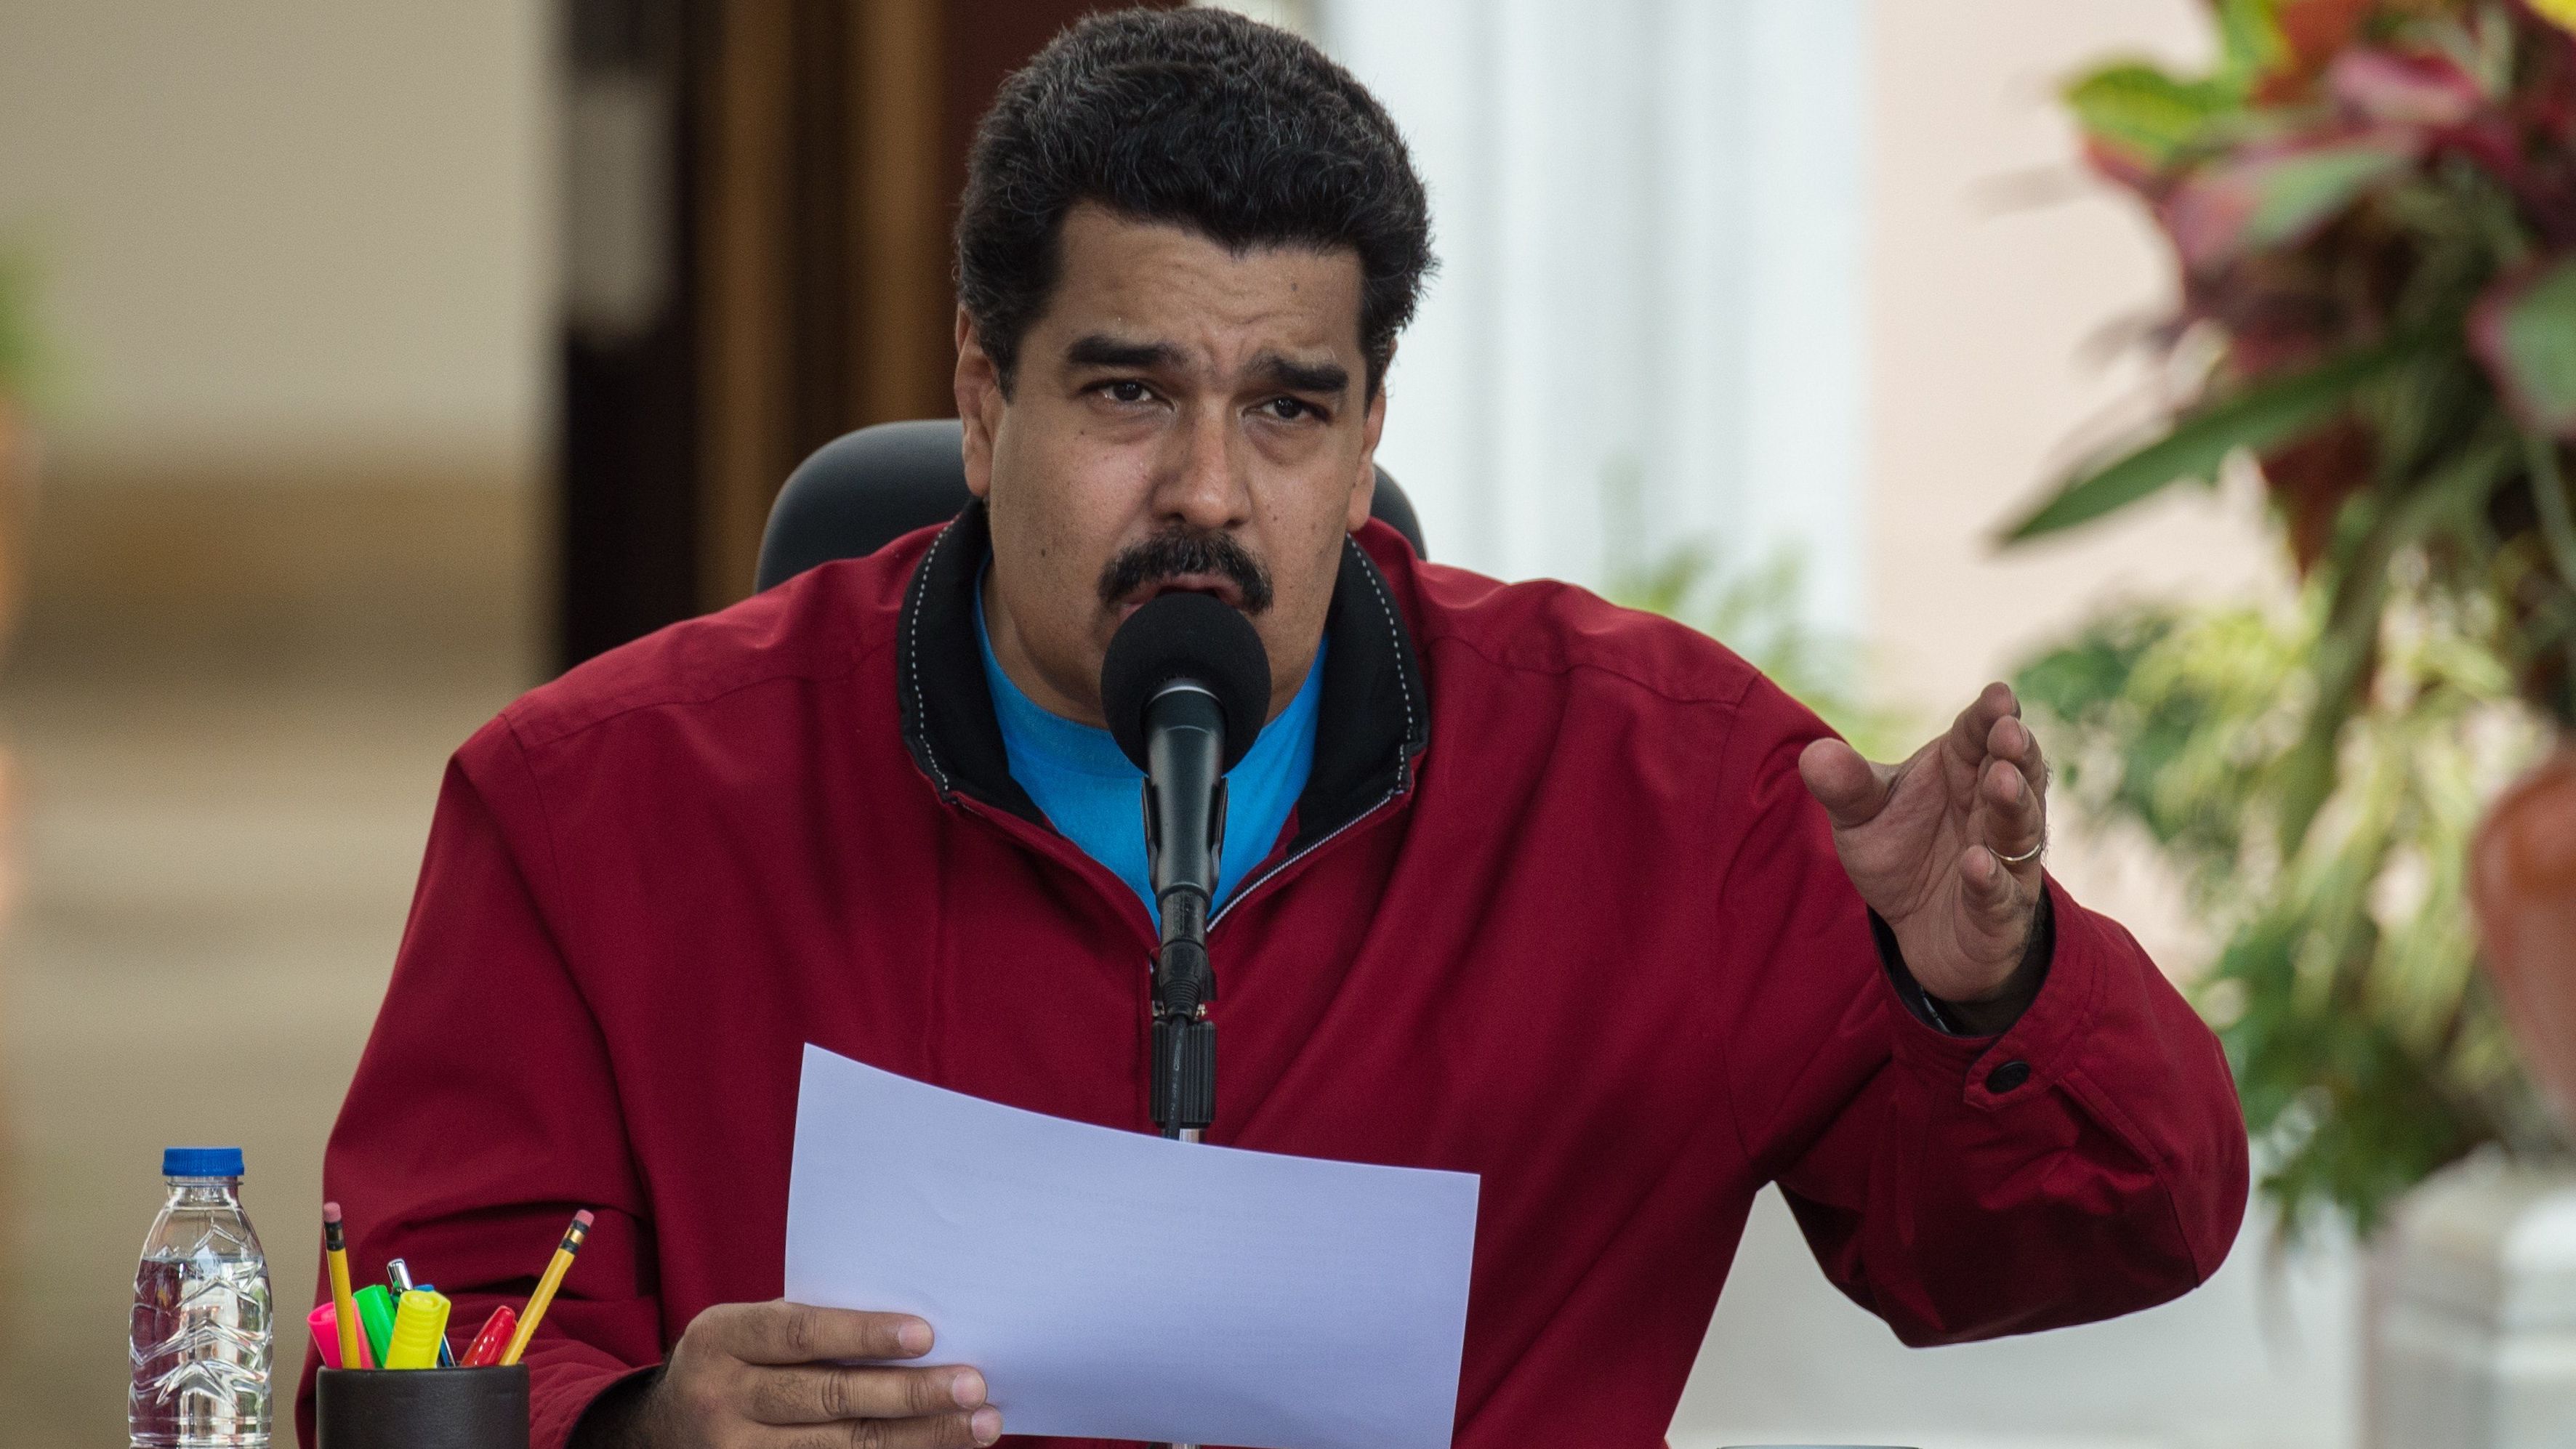 Venezuelan President Nicolas Maduro says a U.S.-backed coup plot has been uncovered.